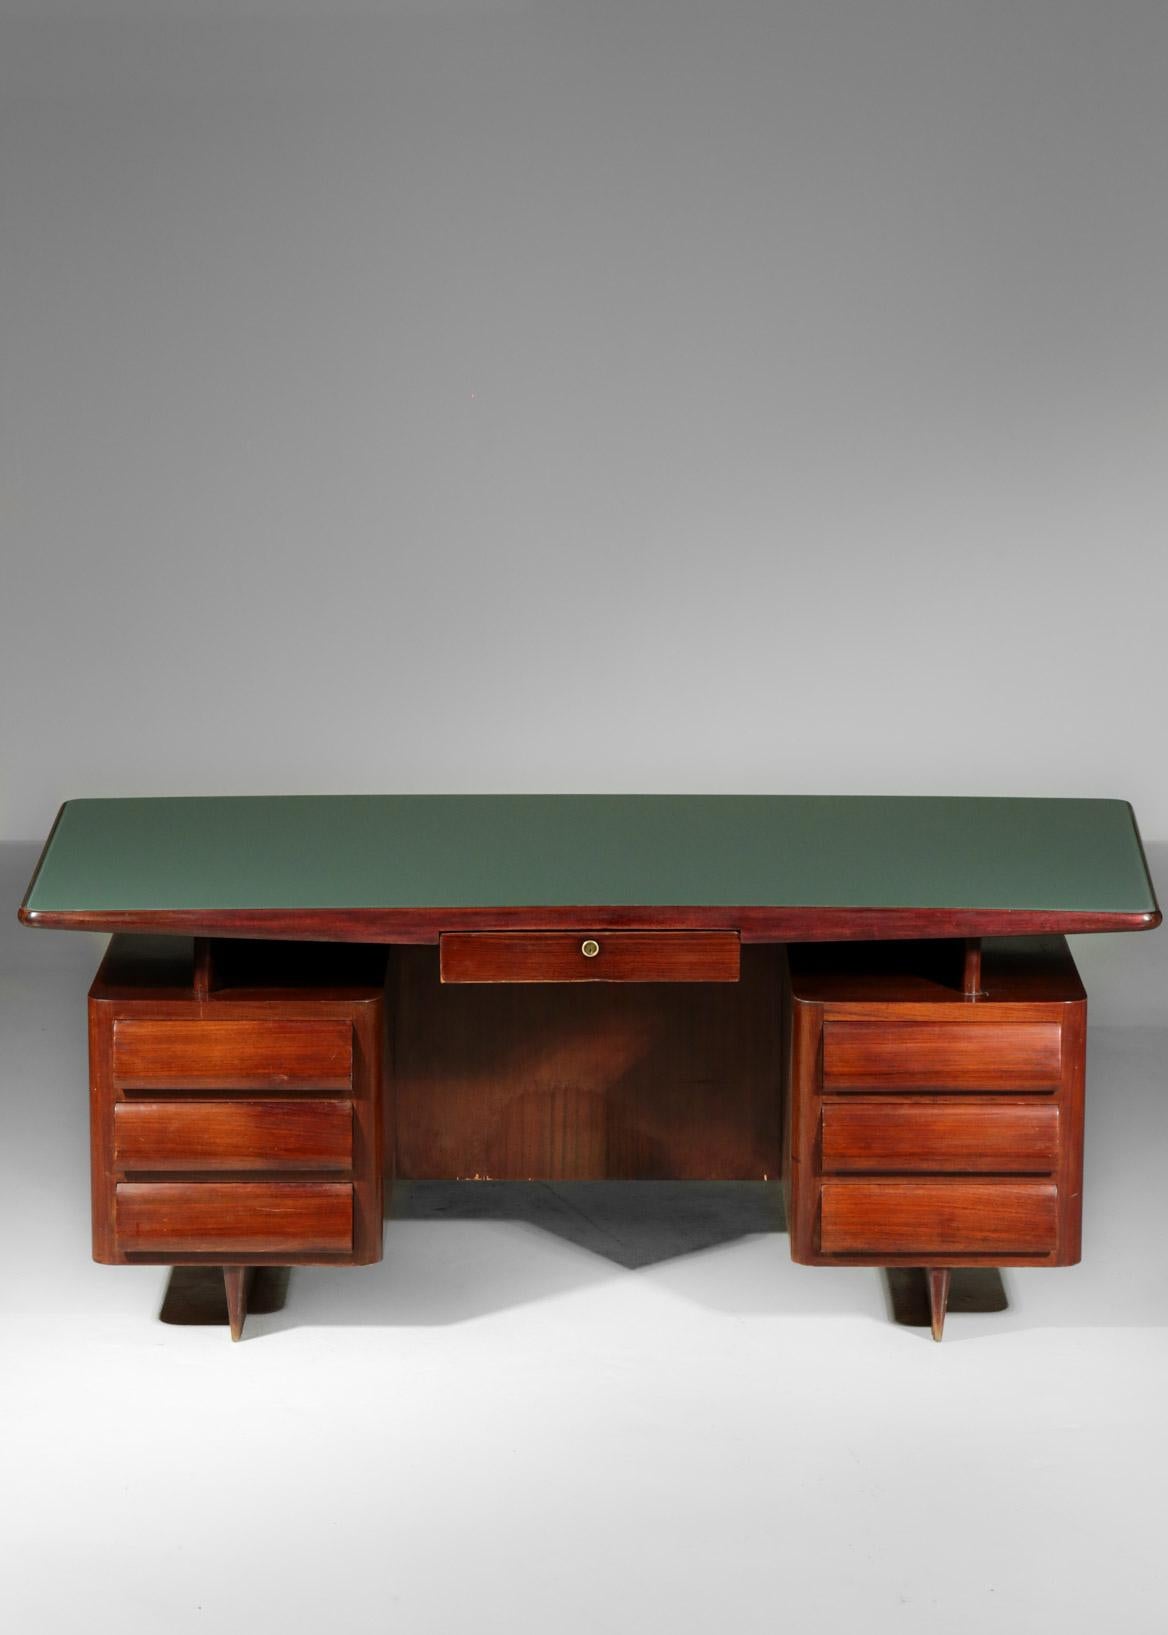 Desk designed by Vittorio Dassi and composed of a floating top with a green glass supported by 2 drawers on each side, made in walnut.